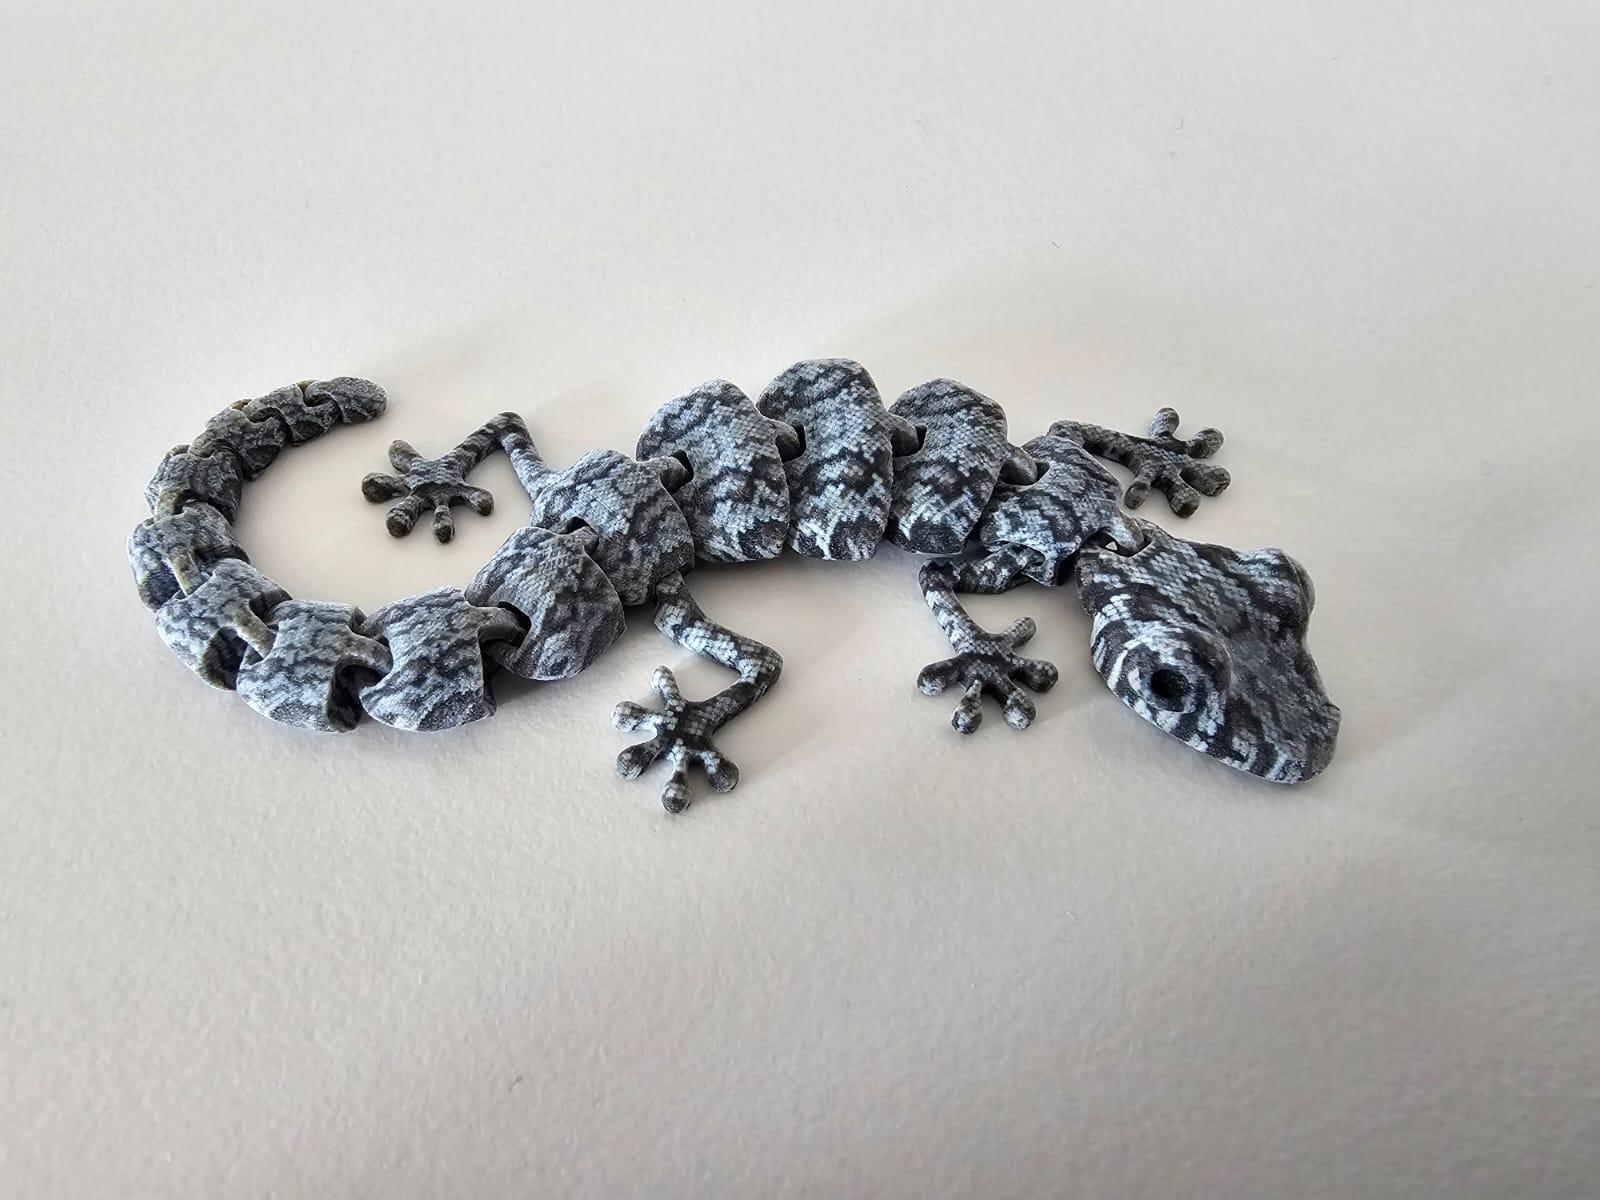 Articulated Lizard v2 - Texture added and printed on a Stratasys J750 - 3d model